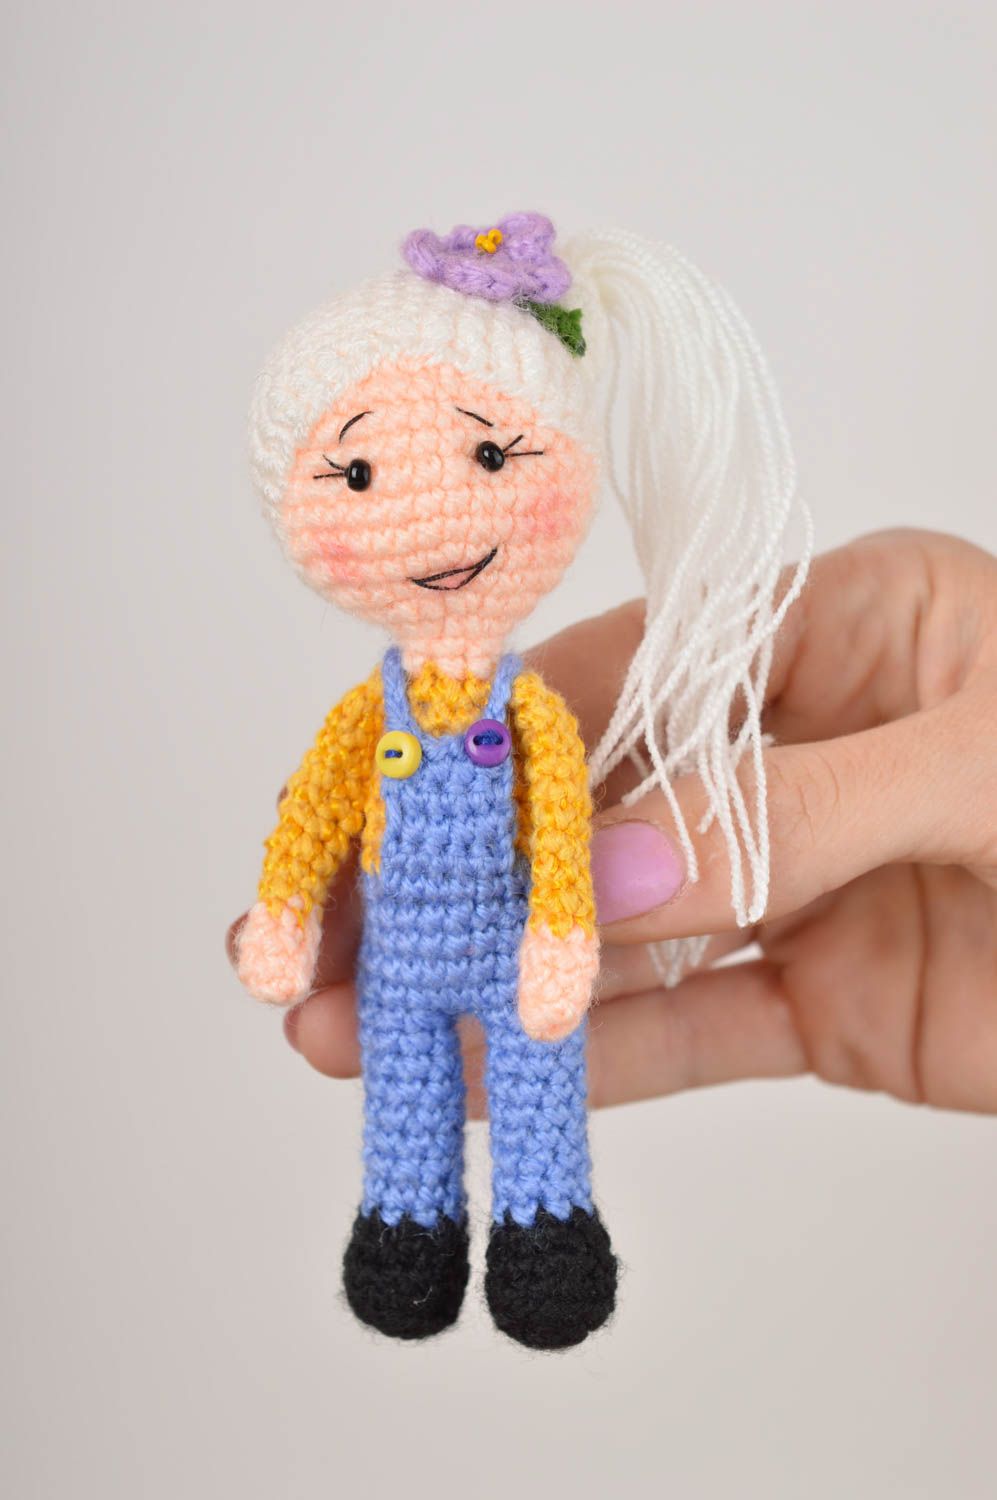 Knitted stuffed girl toy in blue jeans and pink sweater and blond hair. 4 inches tall photo 5